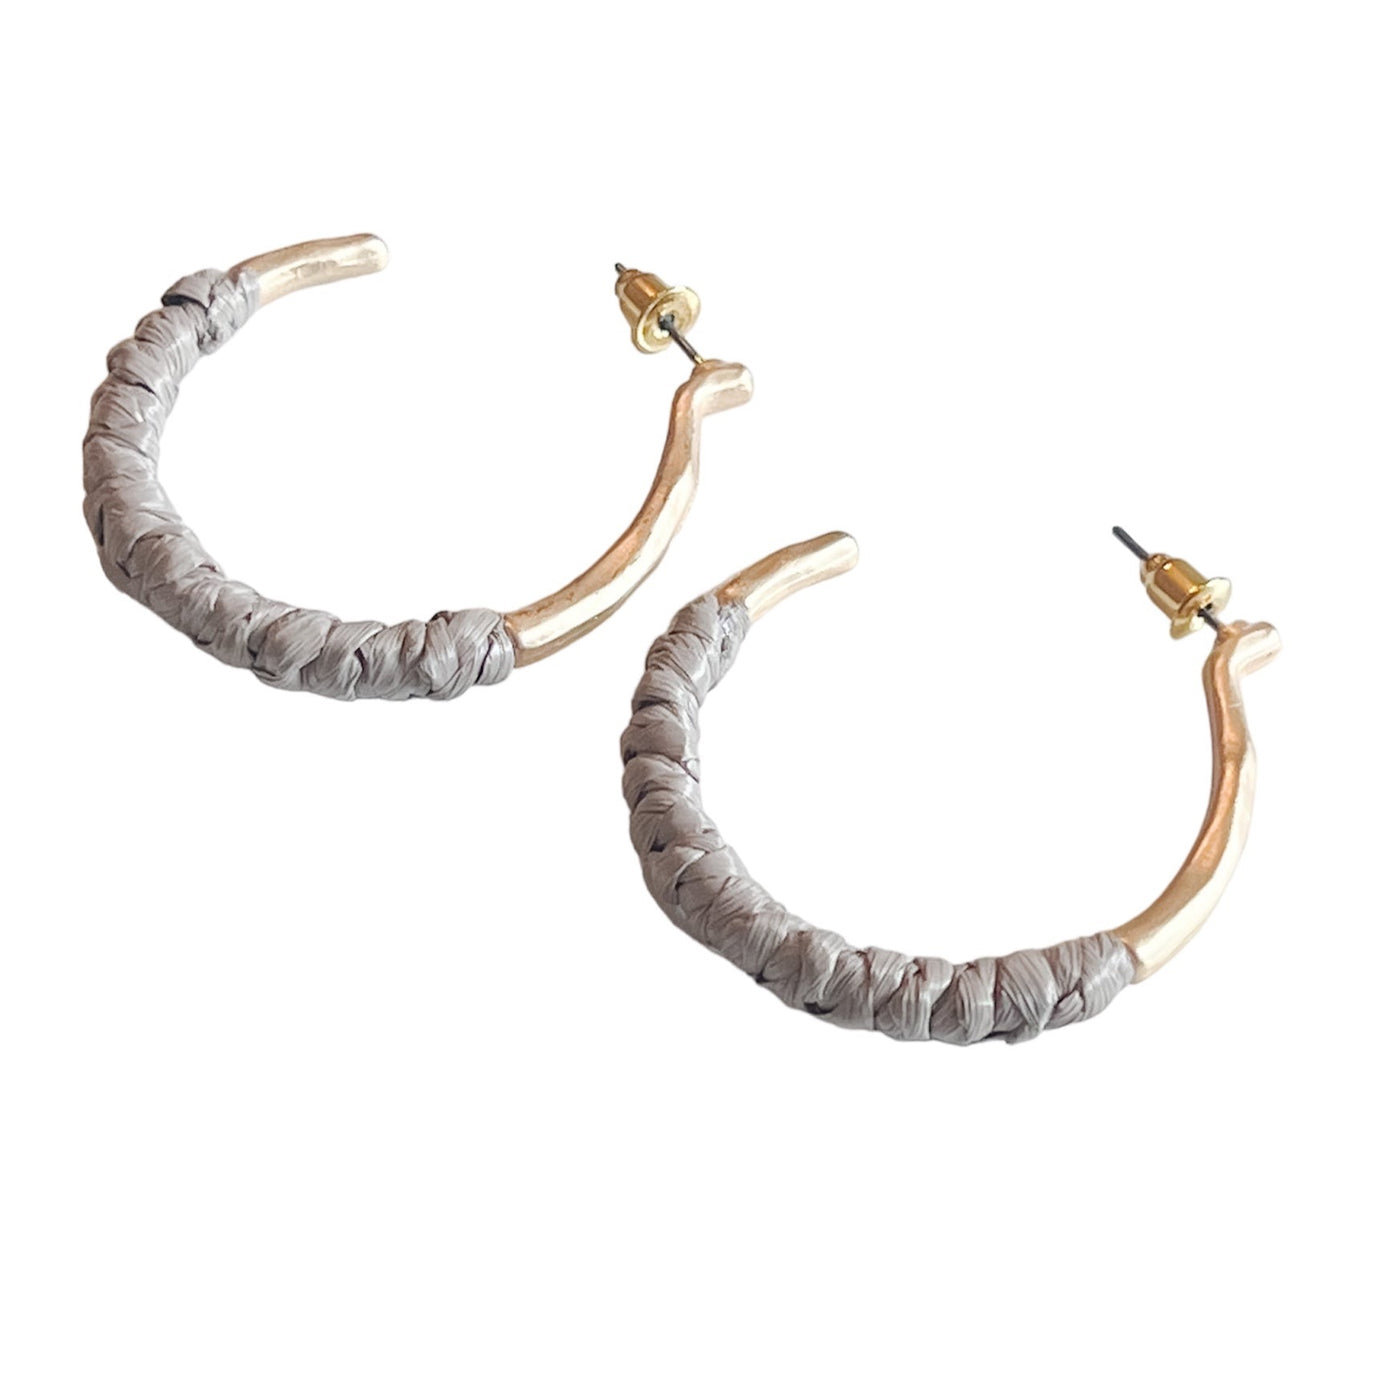 ightweight gold hoops with a comfortable raffia wrap